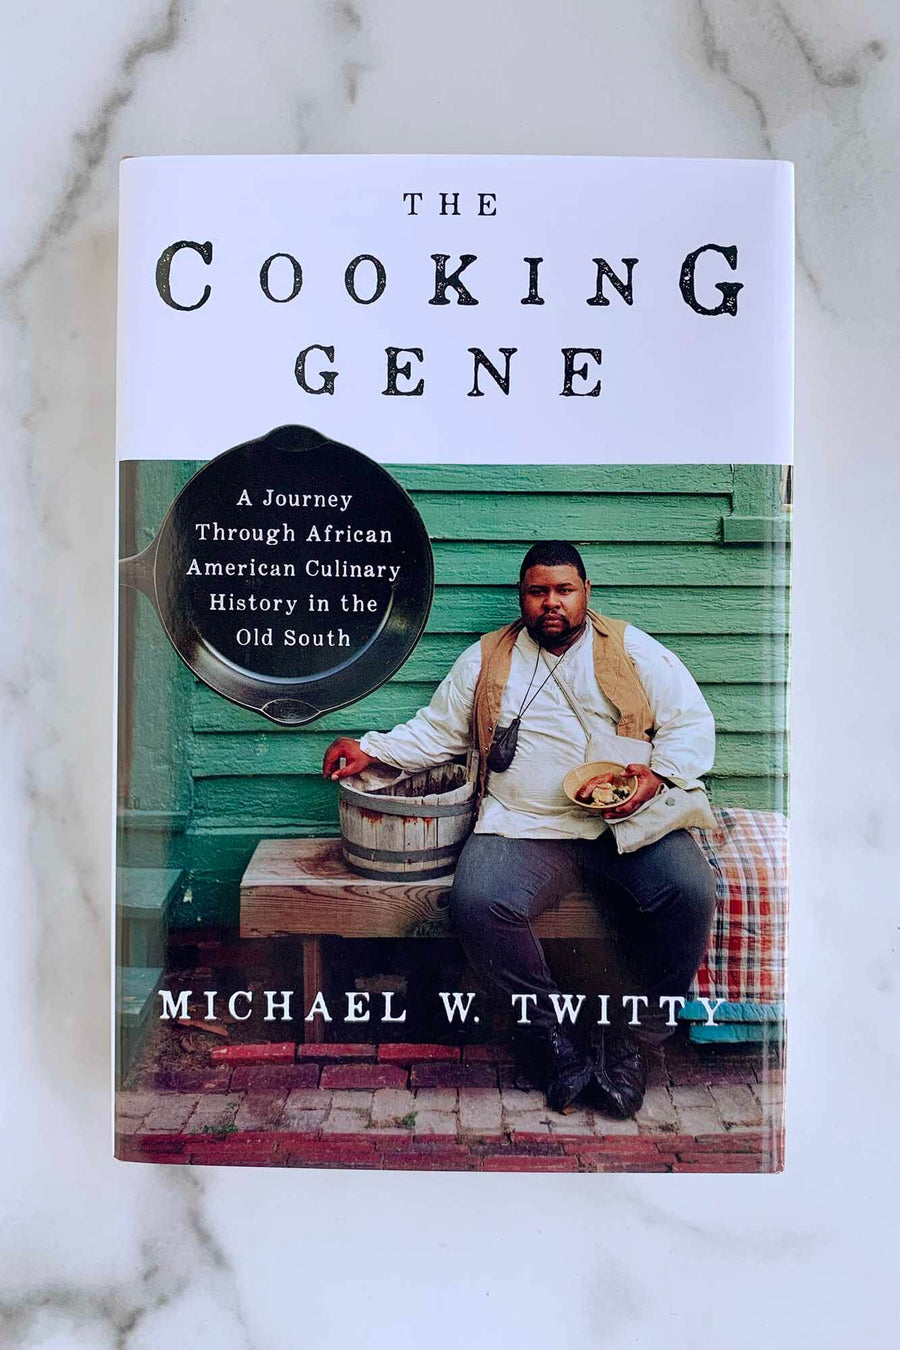 The Cooking Gene